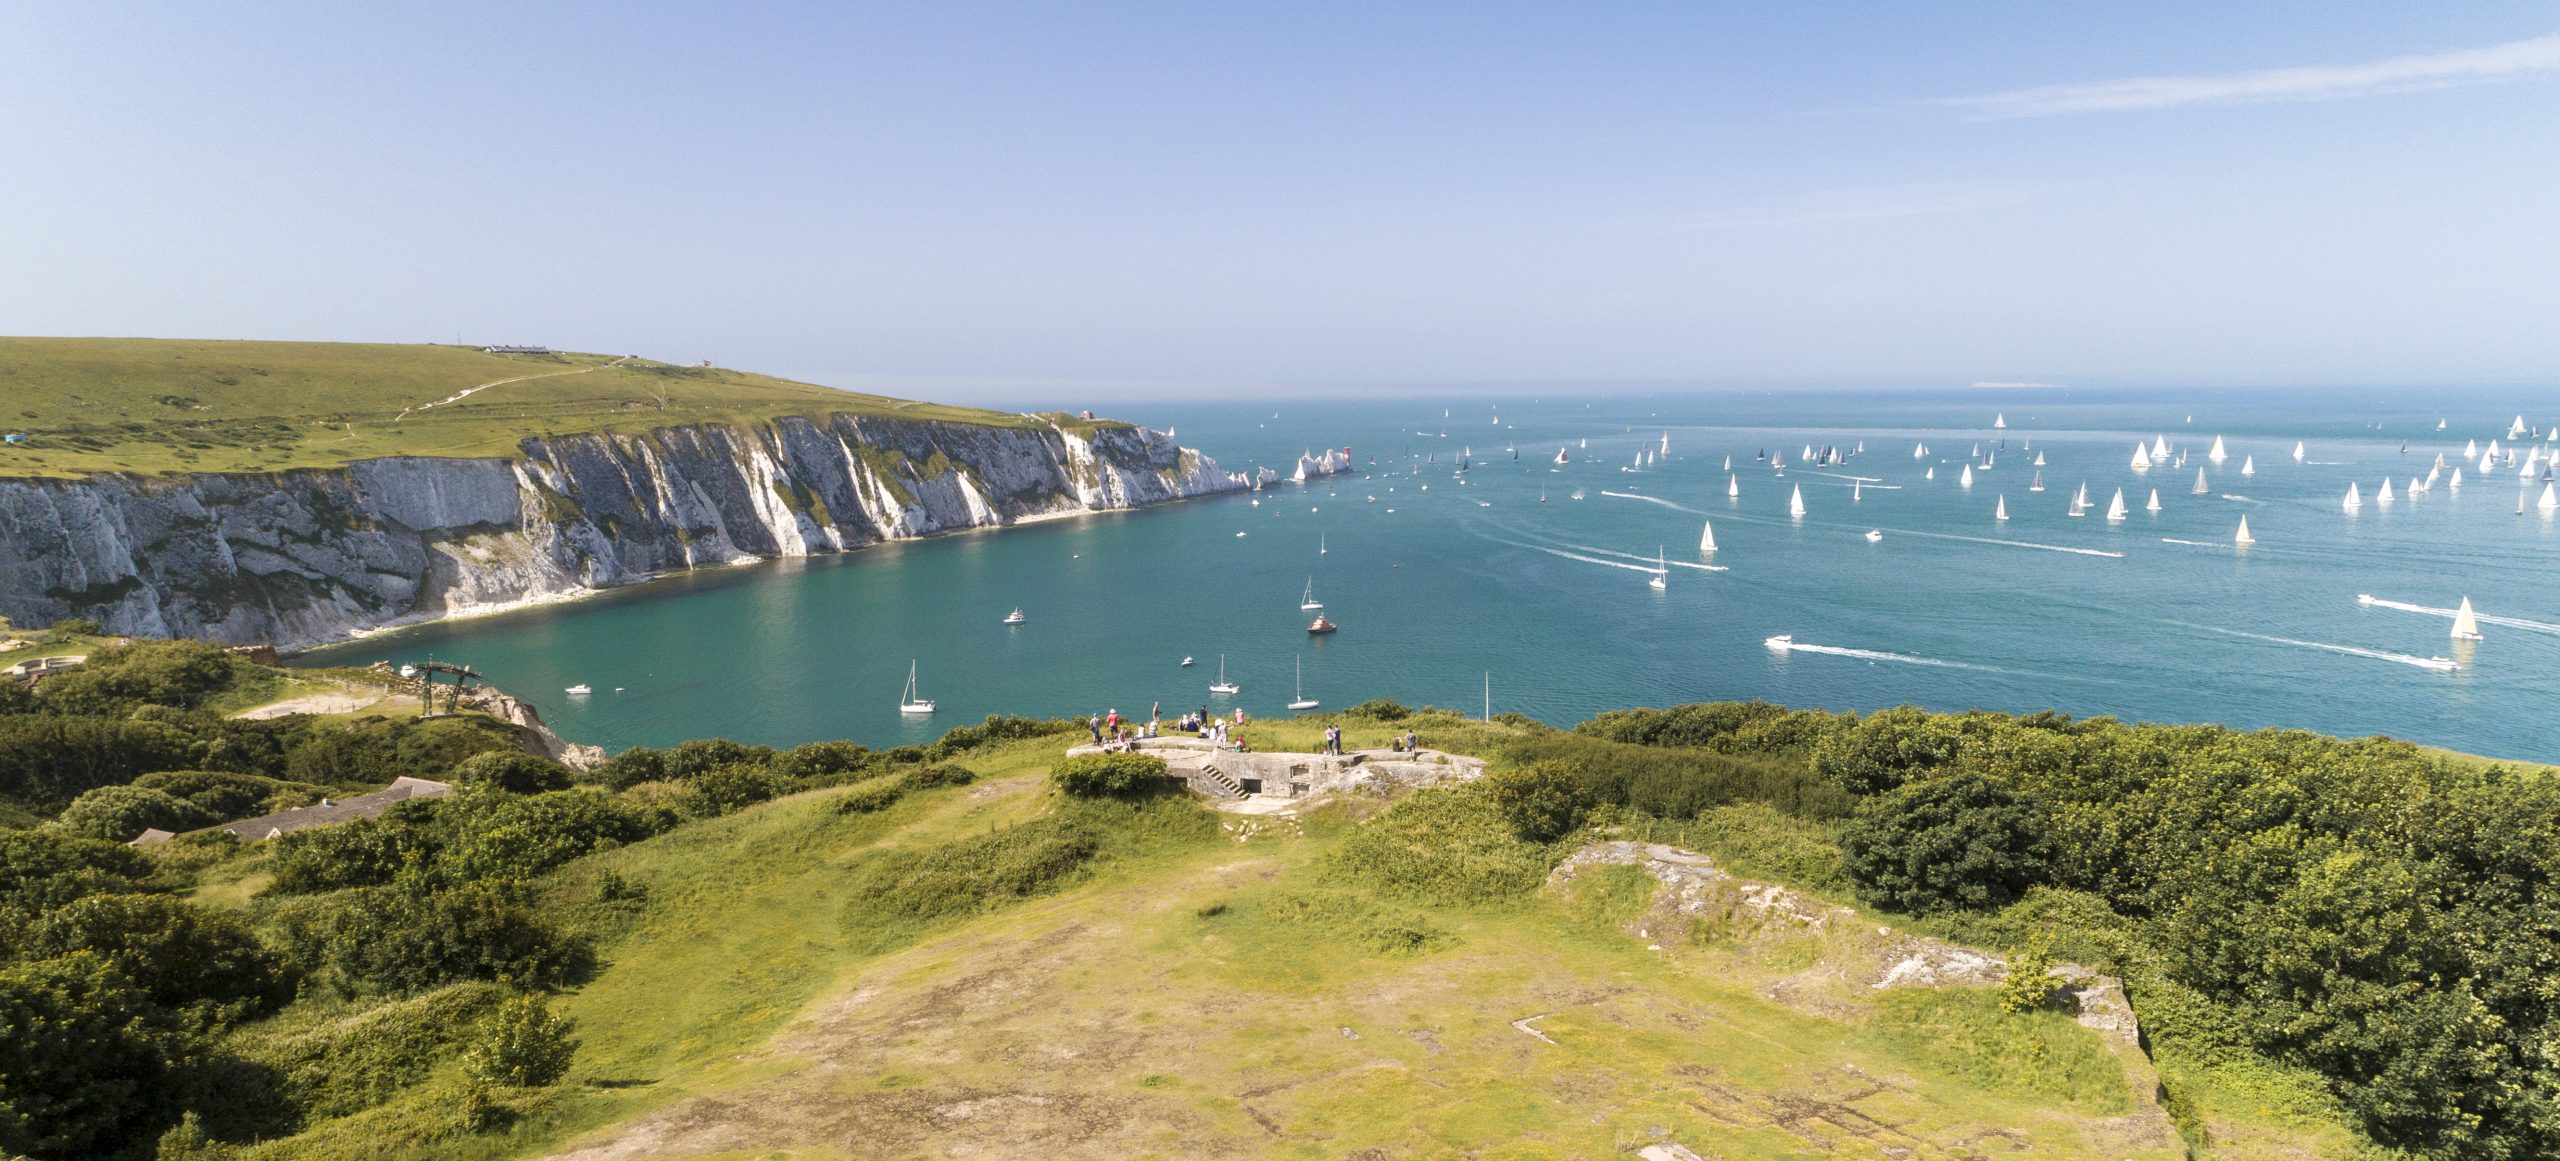 A view across The Needles, Isle of Wight, with many sailing boats in the water and countryside in the foreground